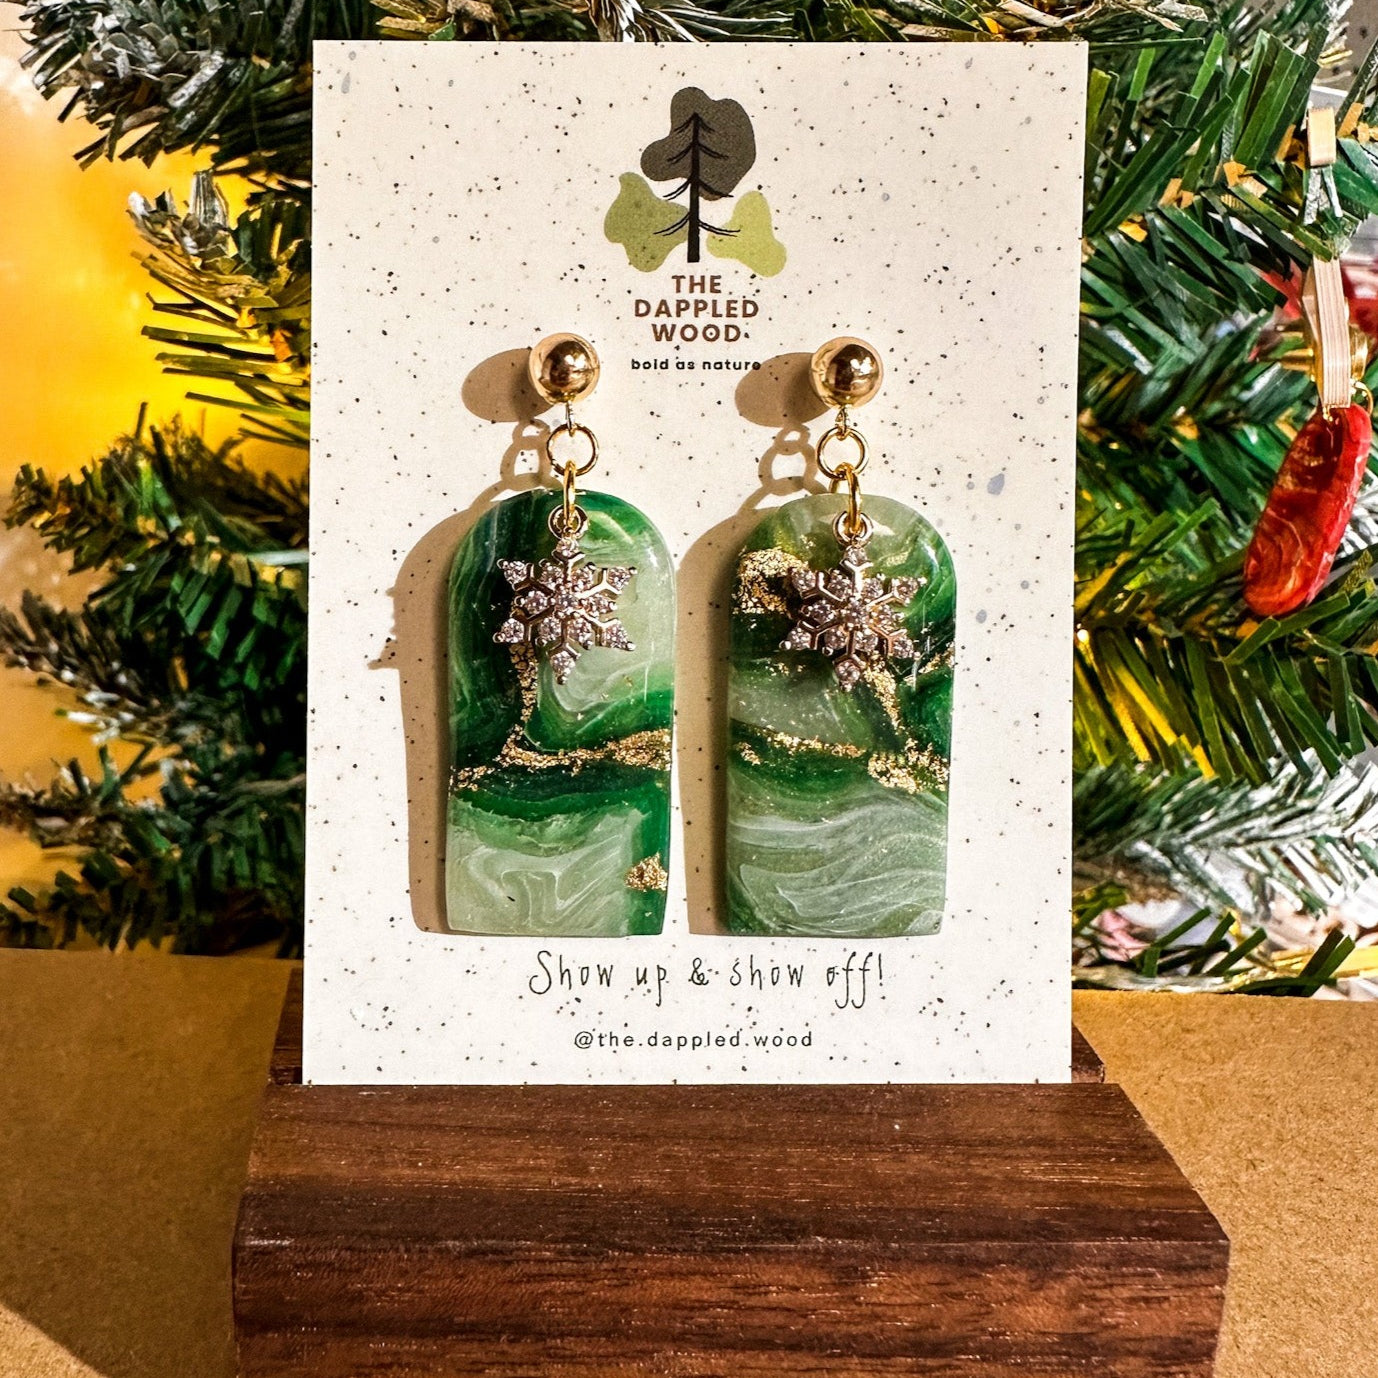 Handcrafted polymer clay earrings with a faux jade agate design displayed on a cardboard holder, embellished with a gold-colored snowflake charm. The earrings are presented against a festive backdrop with a Christmas tree, emphasizing their holiday theme. The holder features the brand name 'The Dappled Wood' with the tagline 'Show up & show off!' and the earrings are resting on a dark wooden stand.